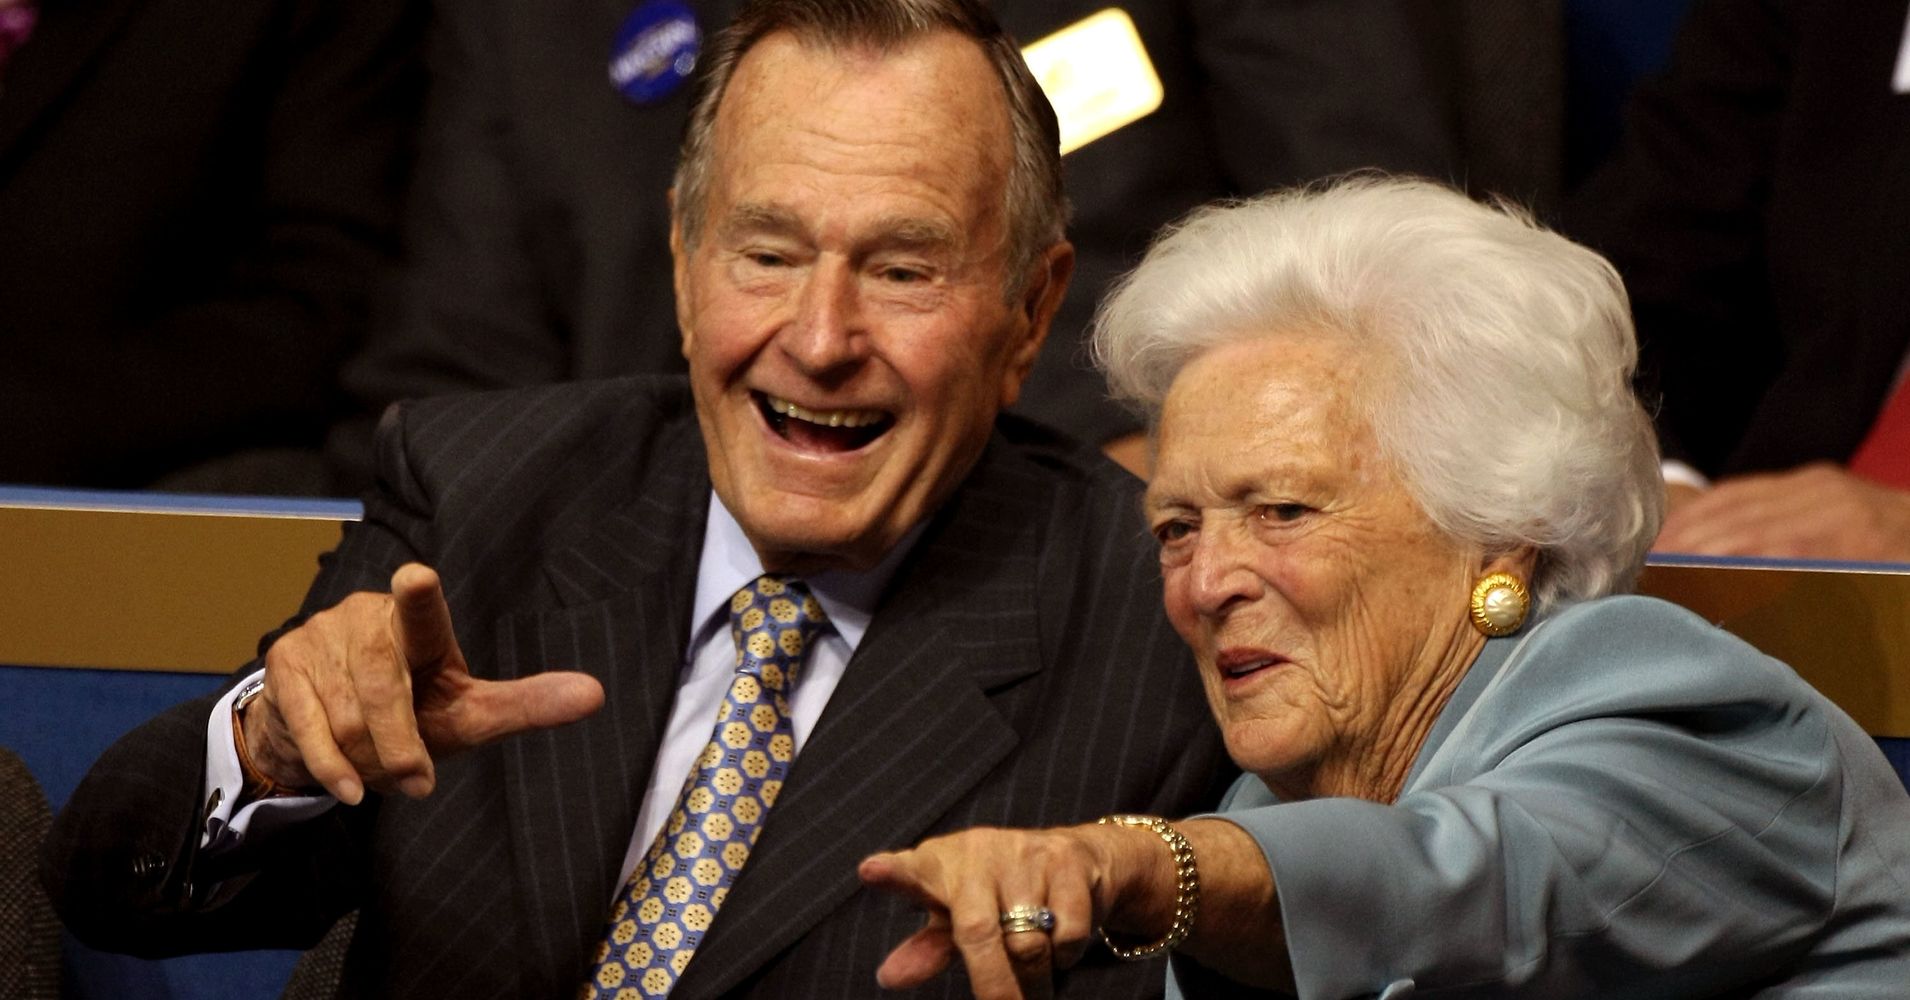 Barbara And George Hw Bush Could Be The Cutest Presidential Couple